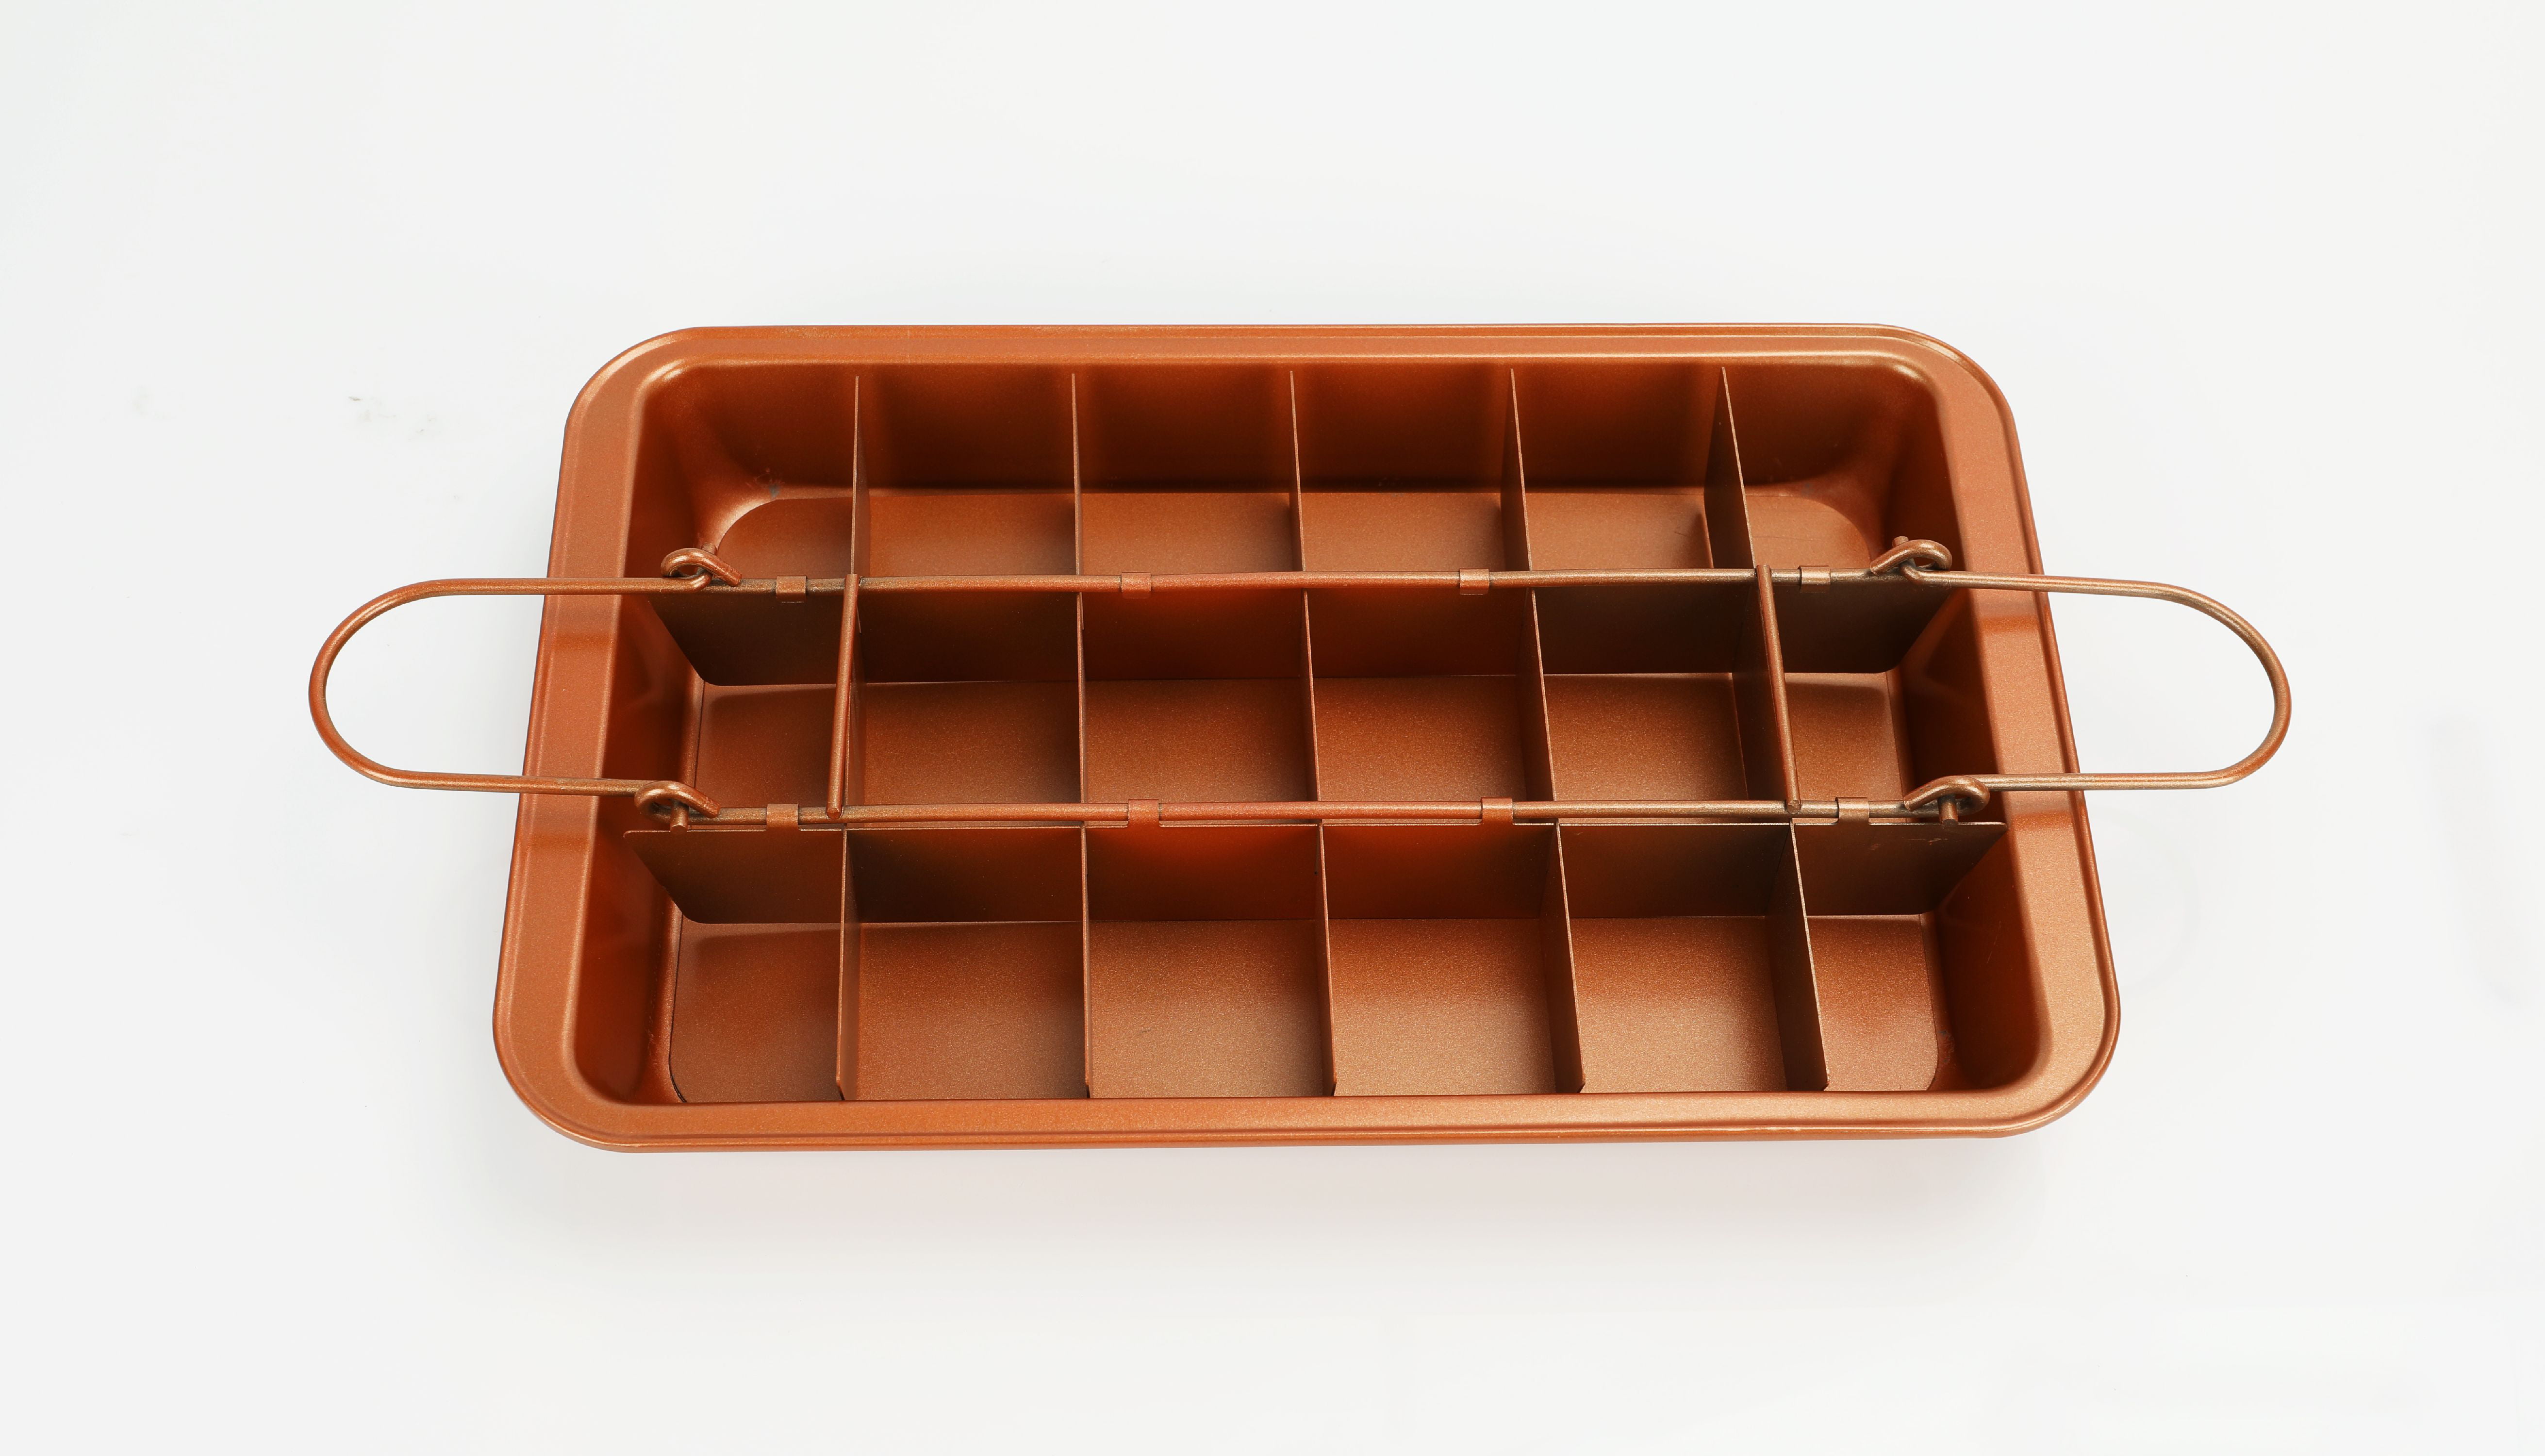 Up To 43% Off on Copper Brownie Pan With Divid